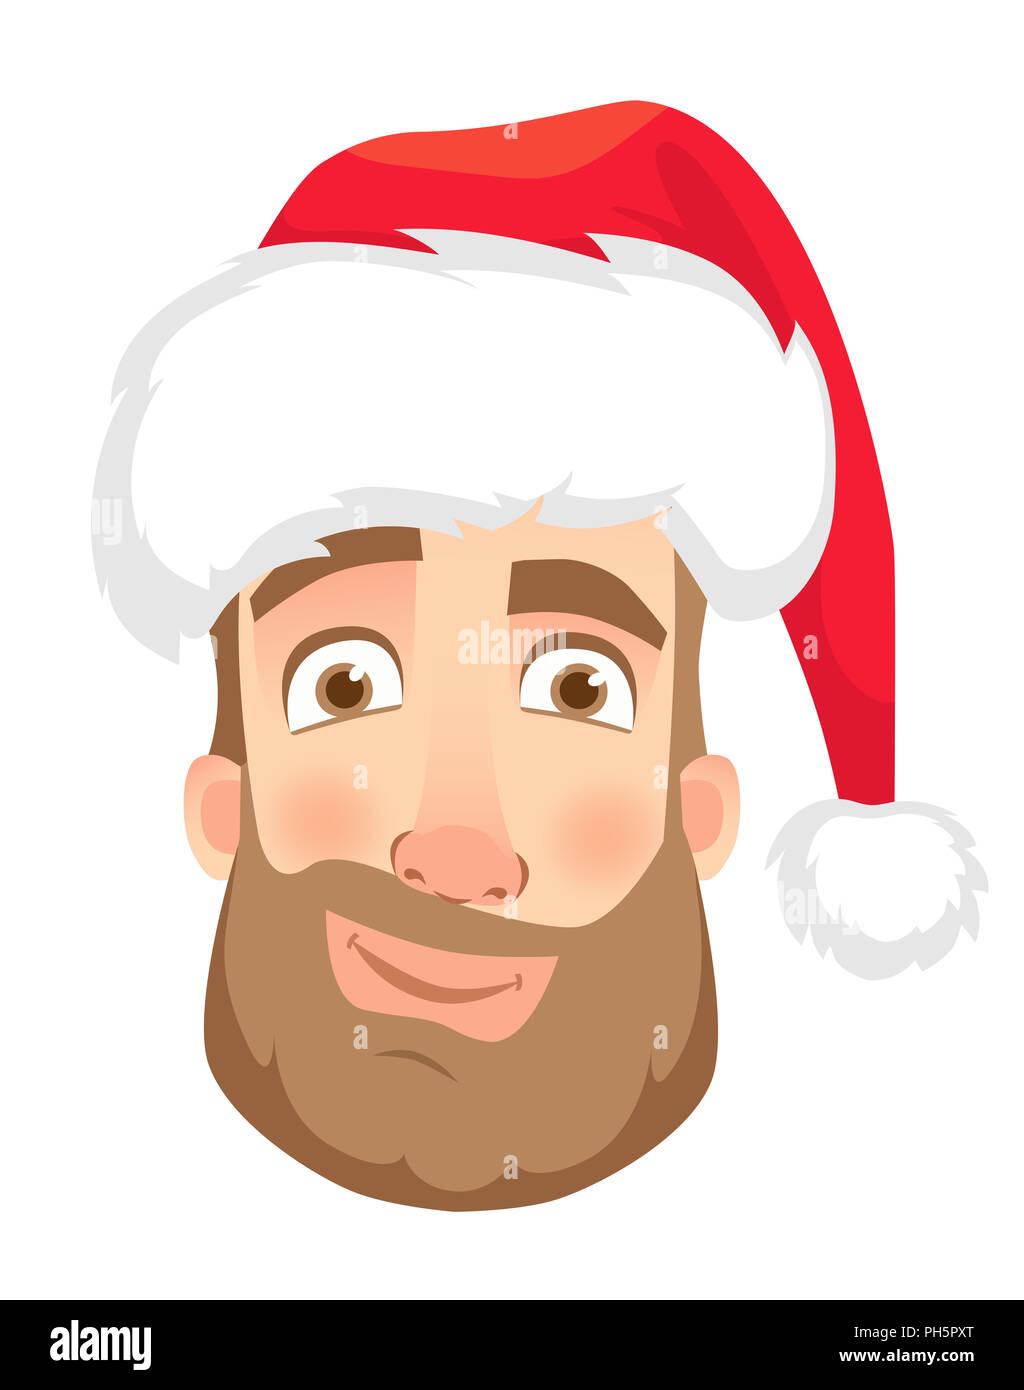 Head of a man in a Santa Claus hat. Man face expression. Human emotions. Set of cartoon illustrations. Smirk Stock Photo